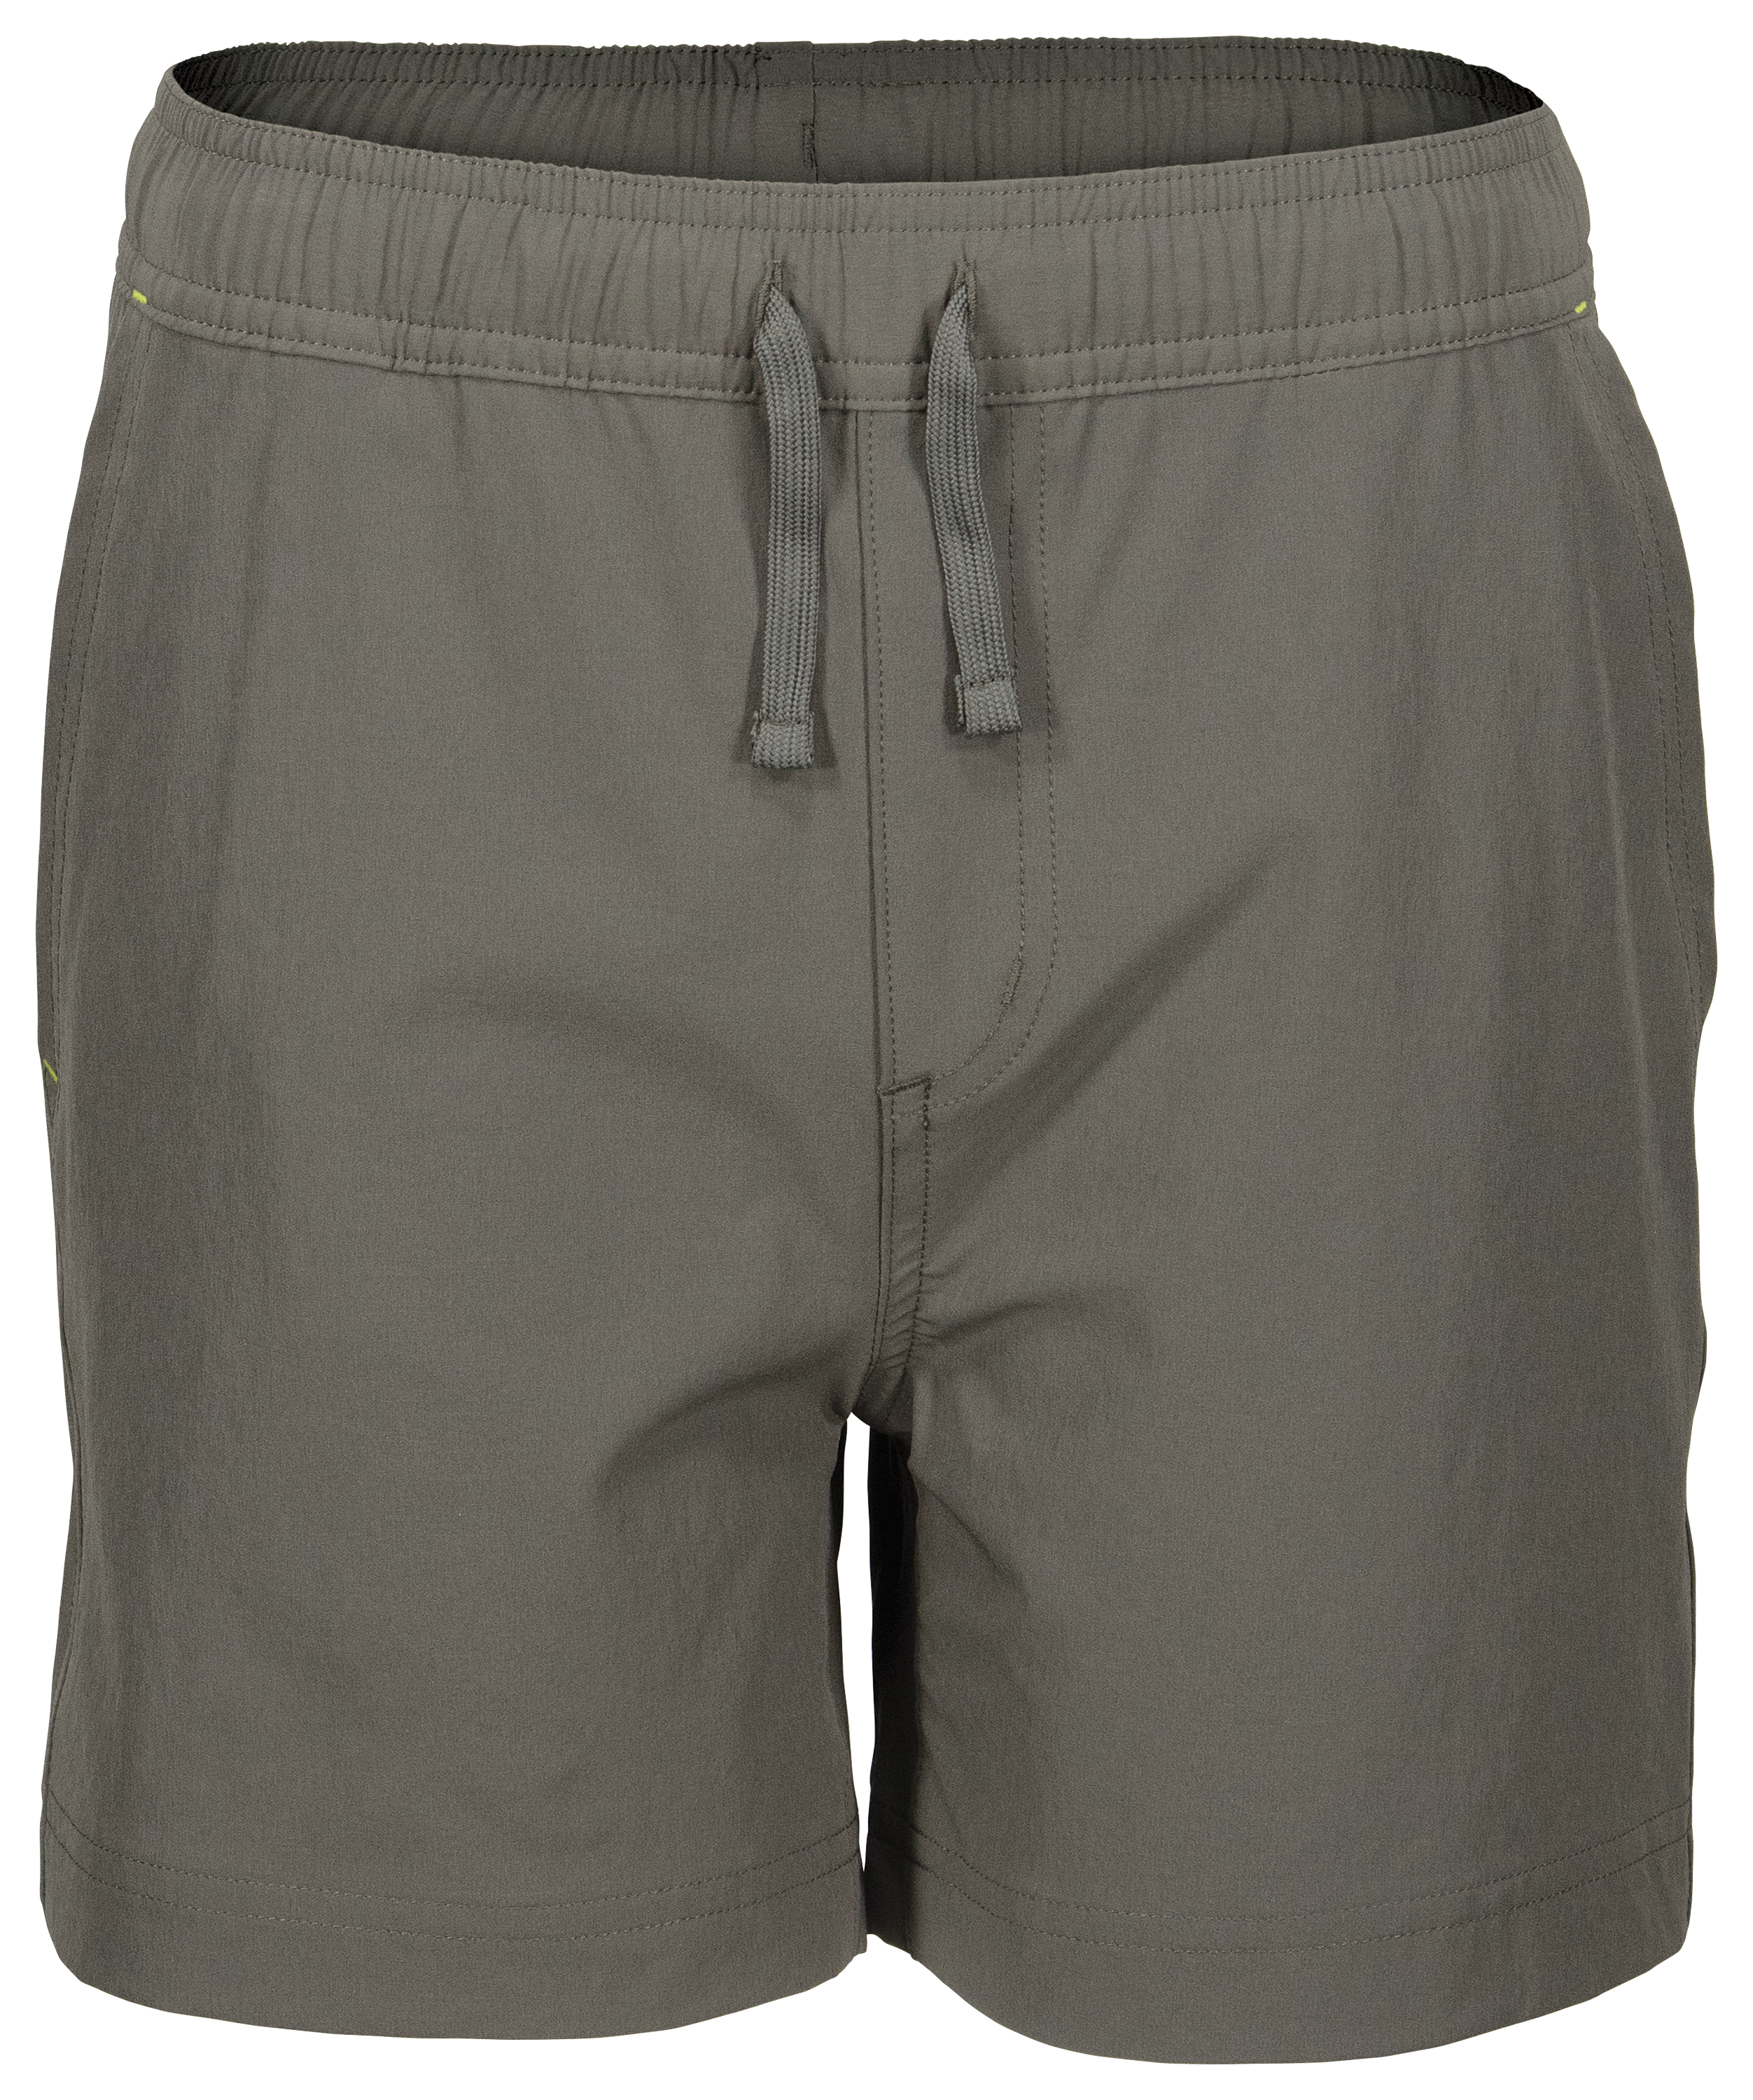 World Wide Sportsman Charter Pull-On Shorts for Boys - Gray - XXS